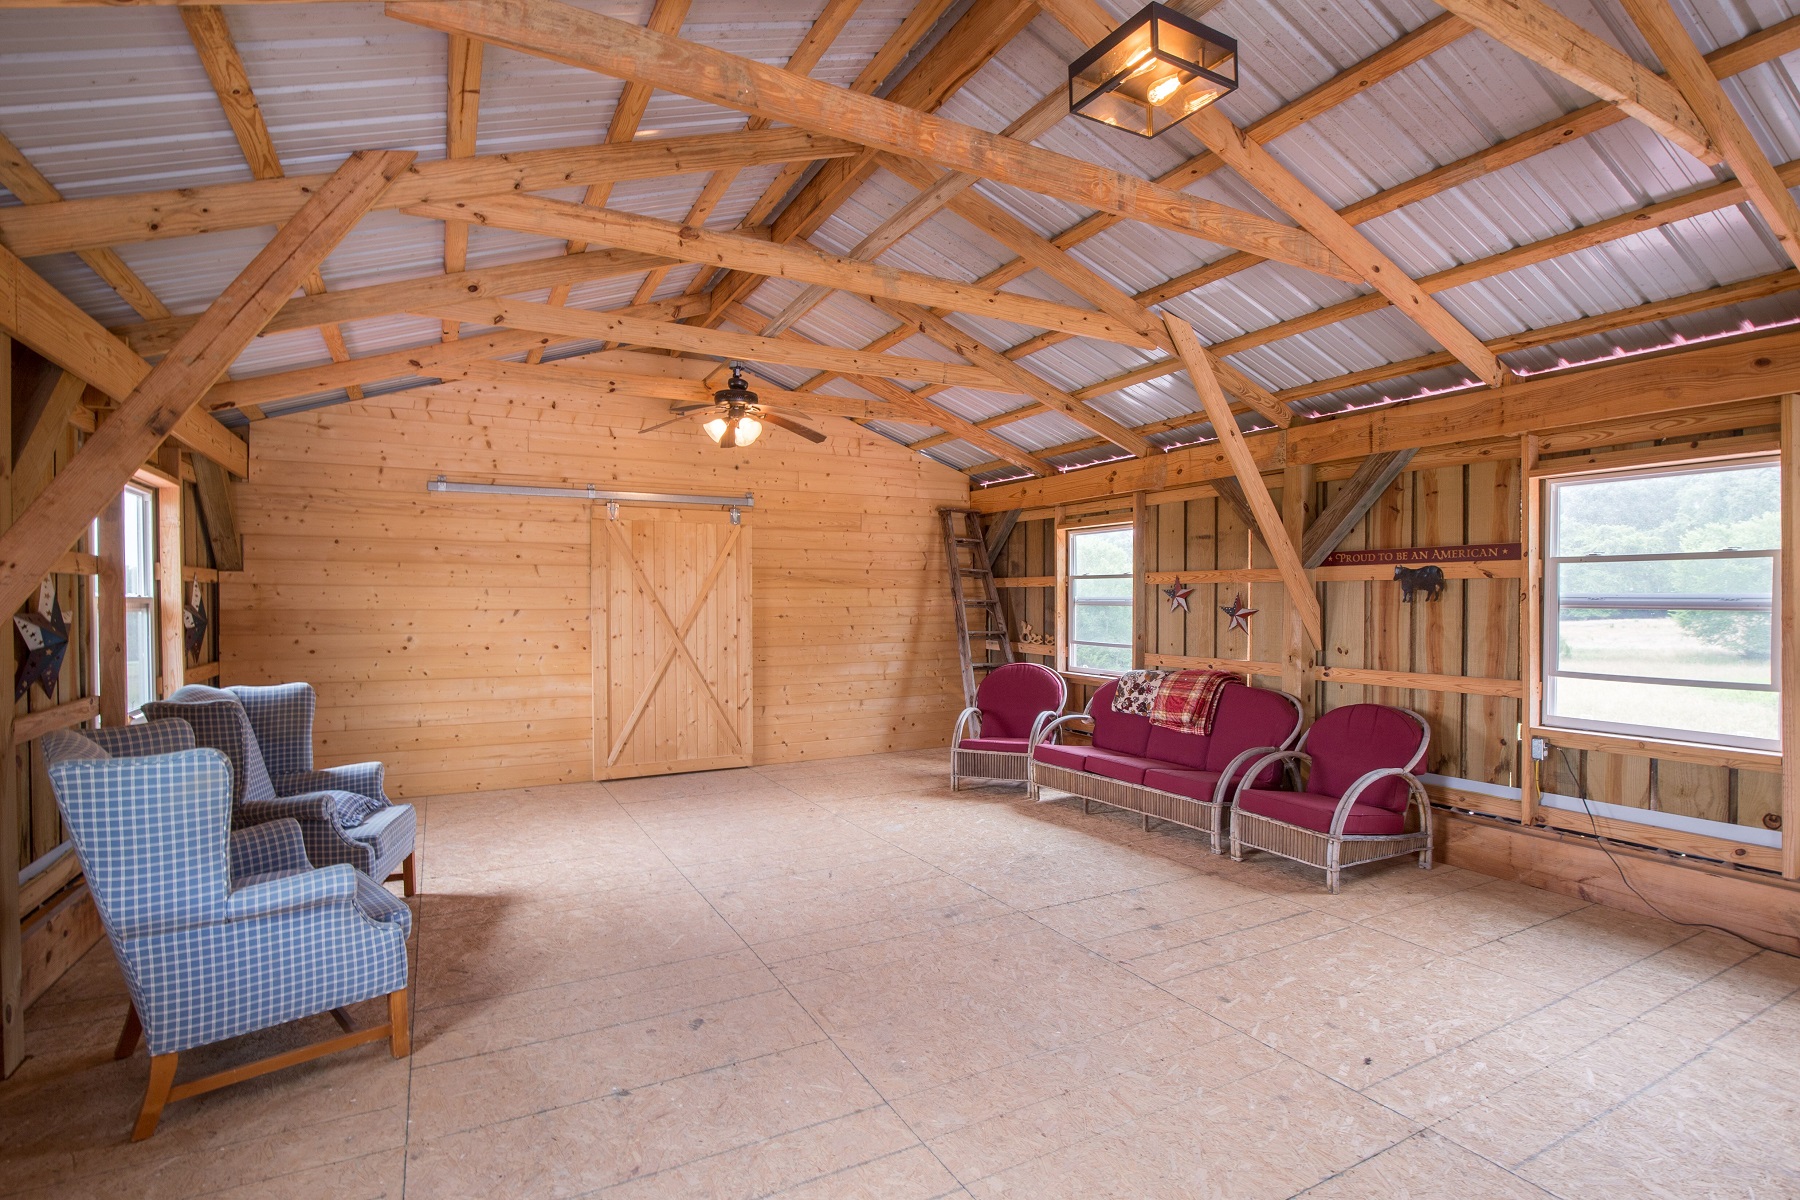 Sitting room in the barn